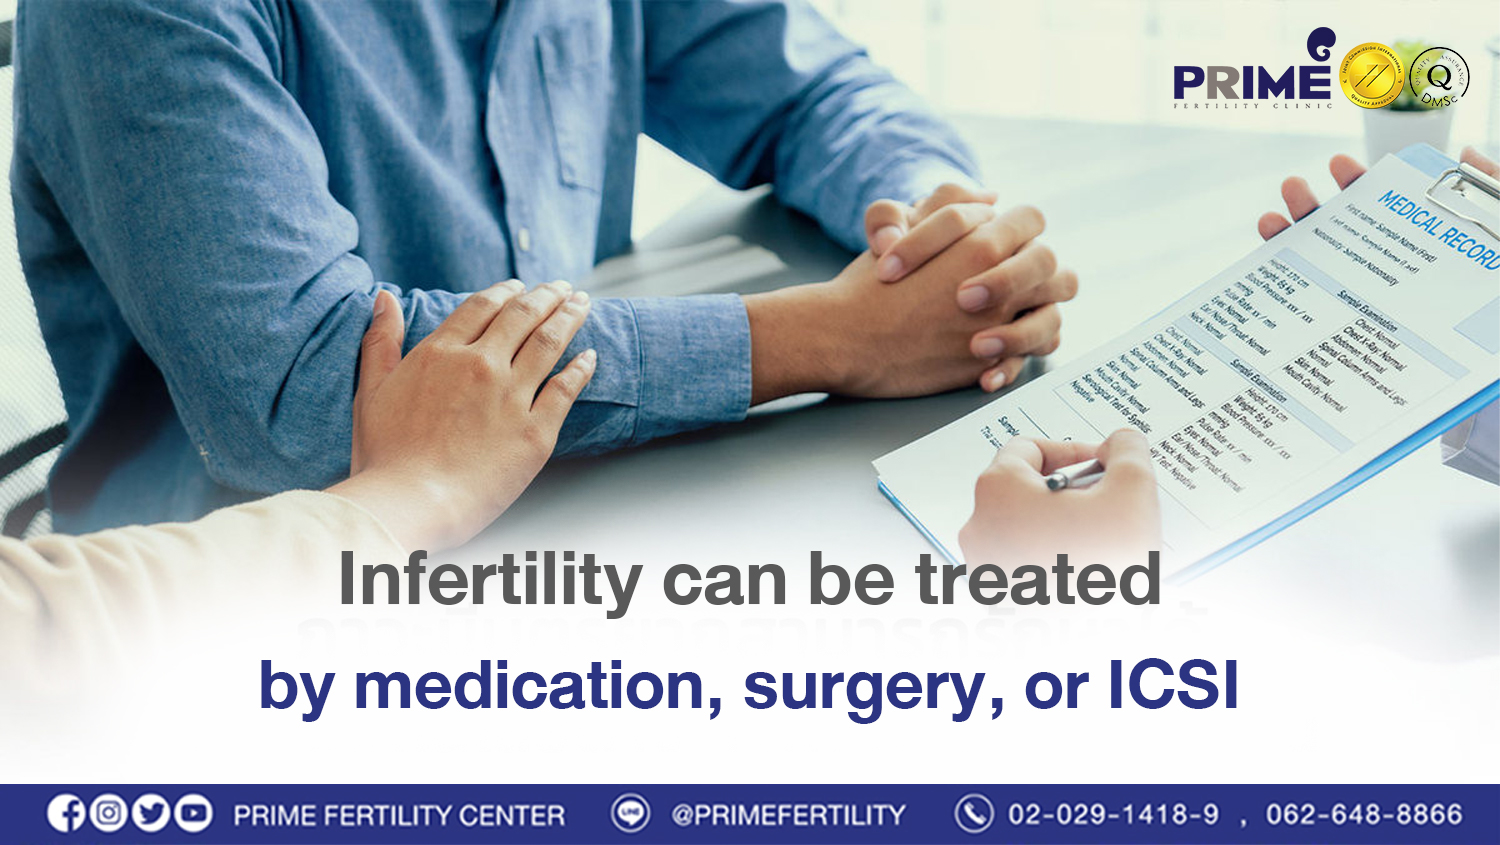 Infertility can be treated by medication, surgery, or ICSI